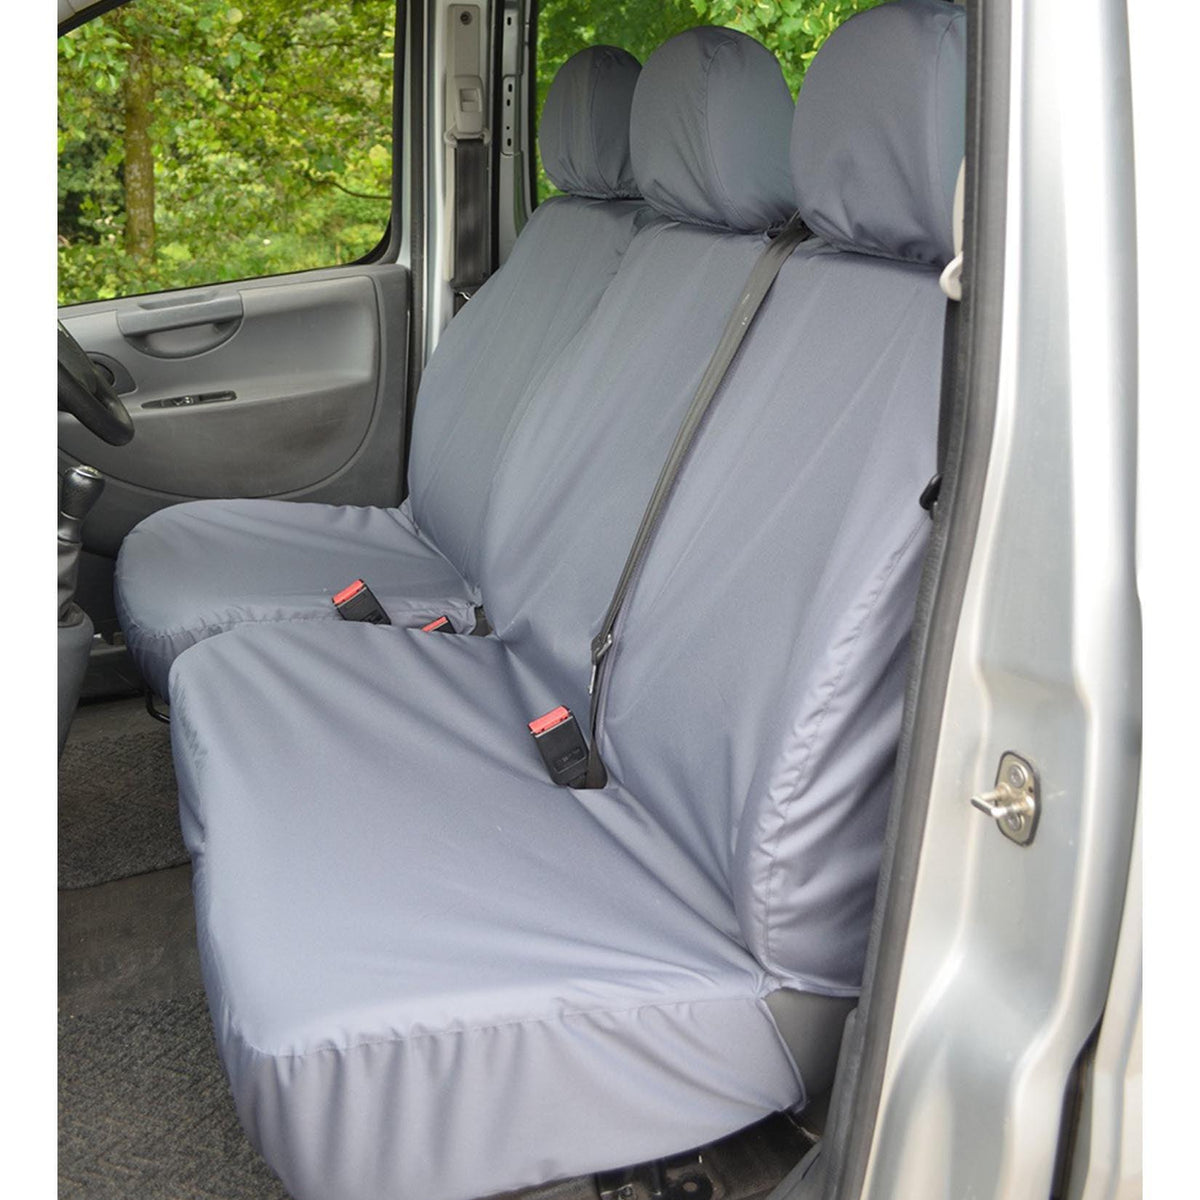 FIAT SCUDO VAN 2007-2016 DRIVER AND DOUBLE PASSENGER SEAT COVERS - GREY - Storm Xccessories2